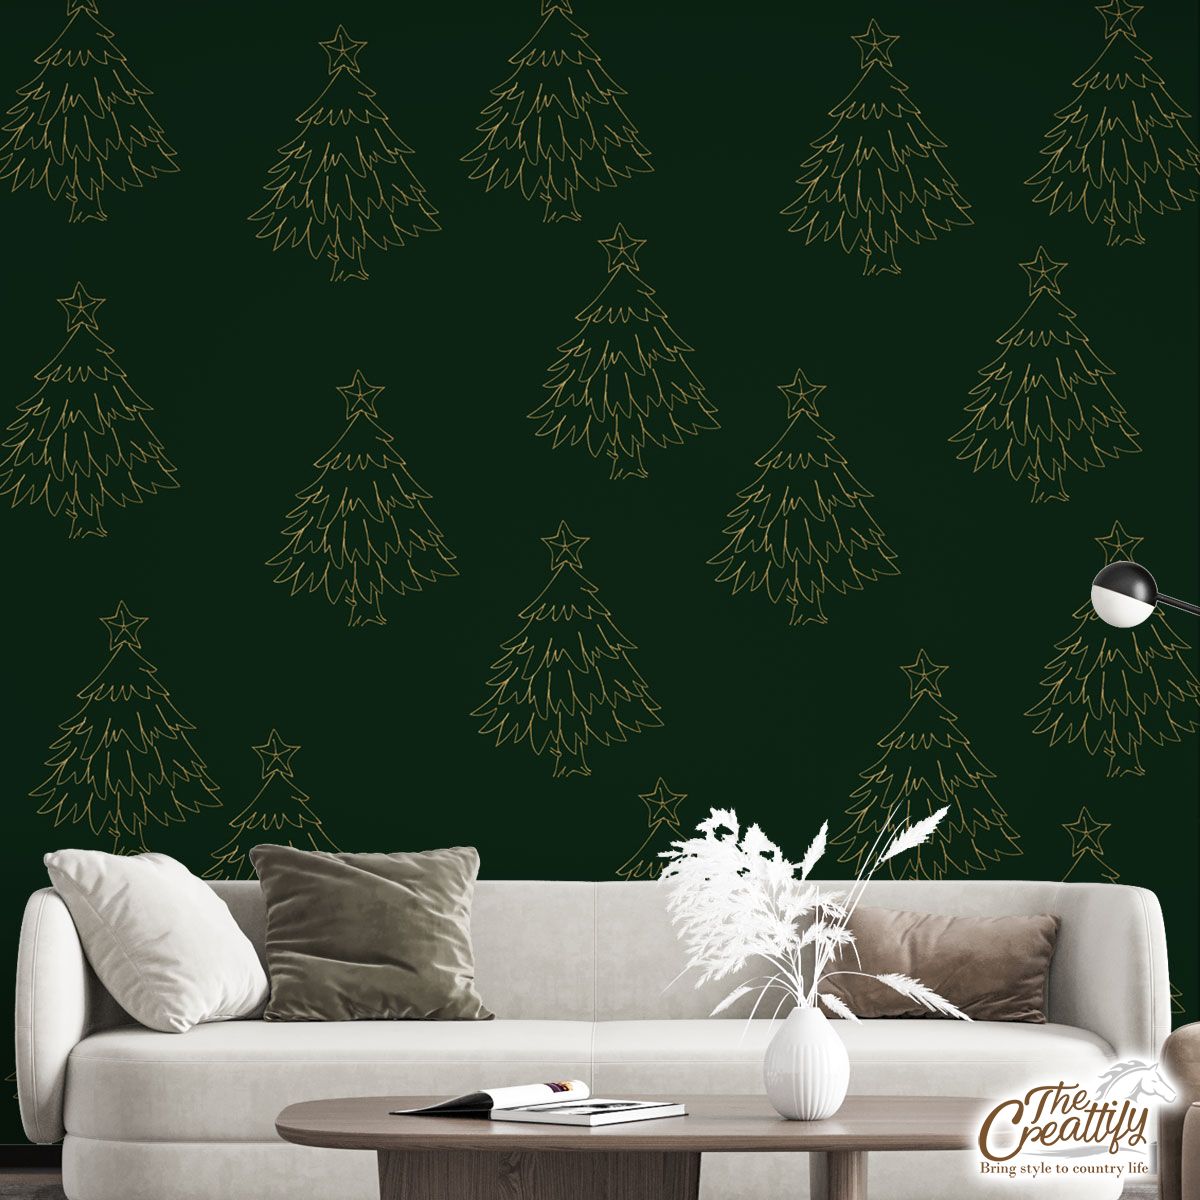 Gold And Green Christmas Tree Wall Mural